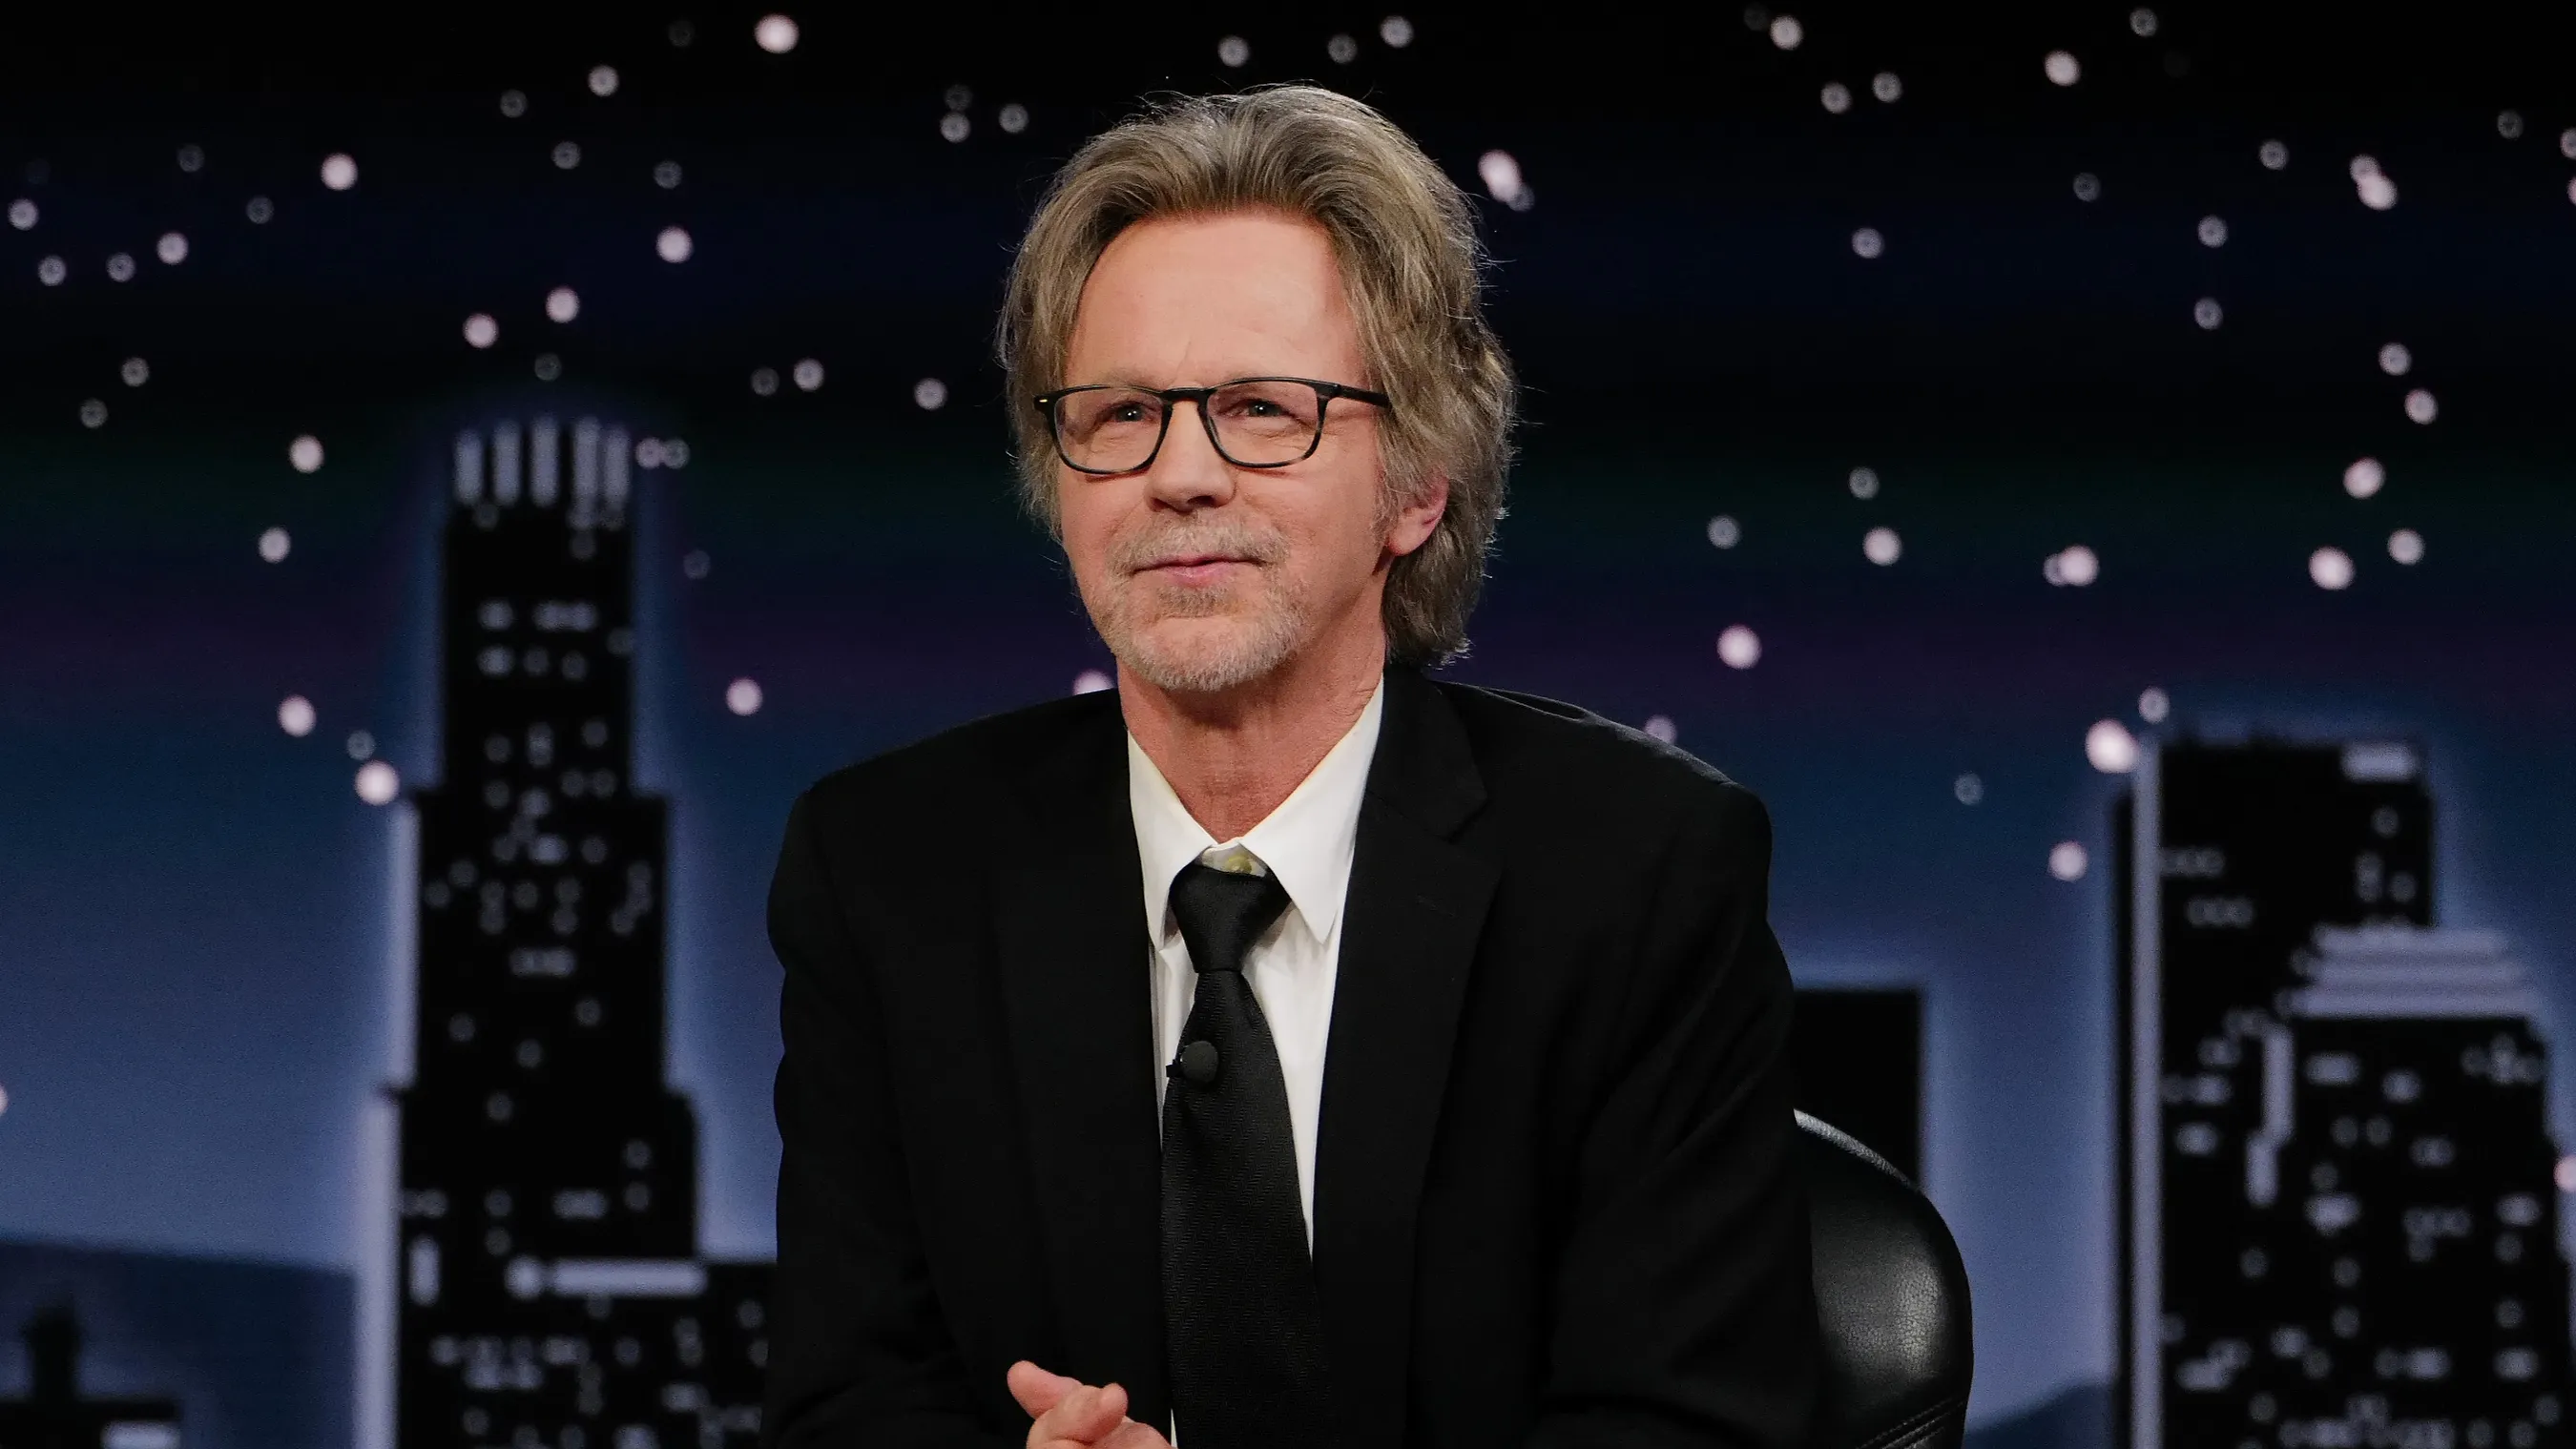 dana-carvey-expresses-gratitude-to-supporters-following-tragic-loss-of-son